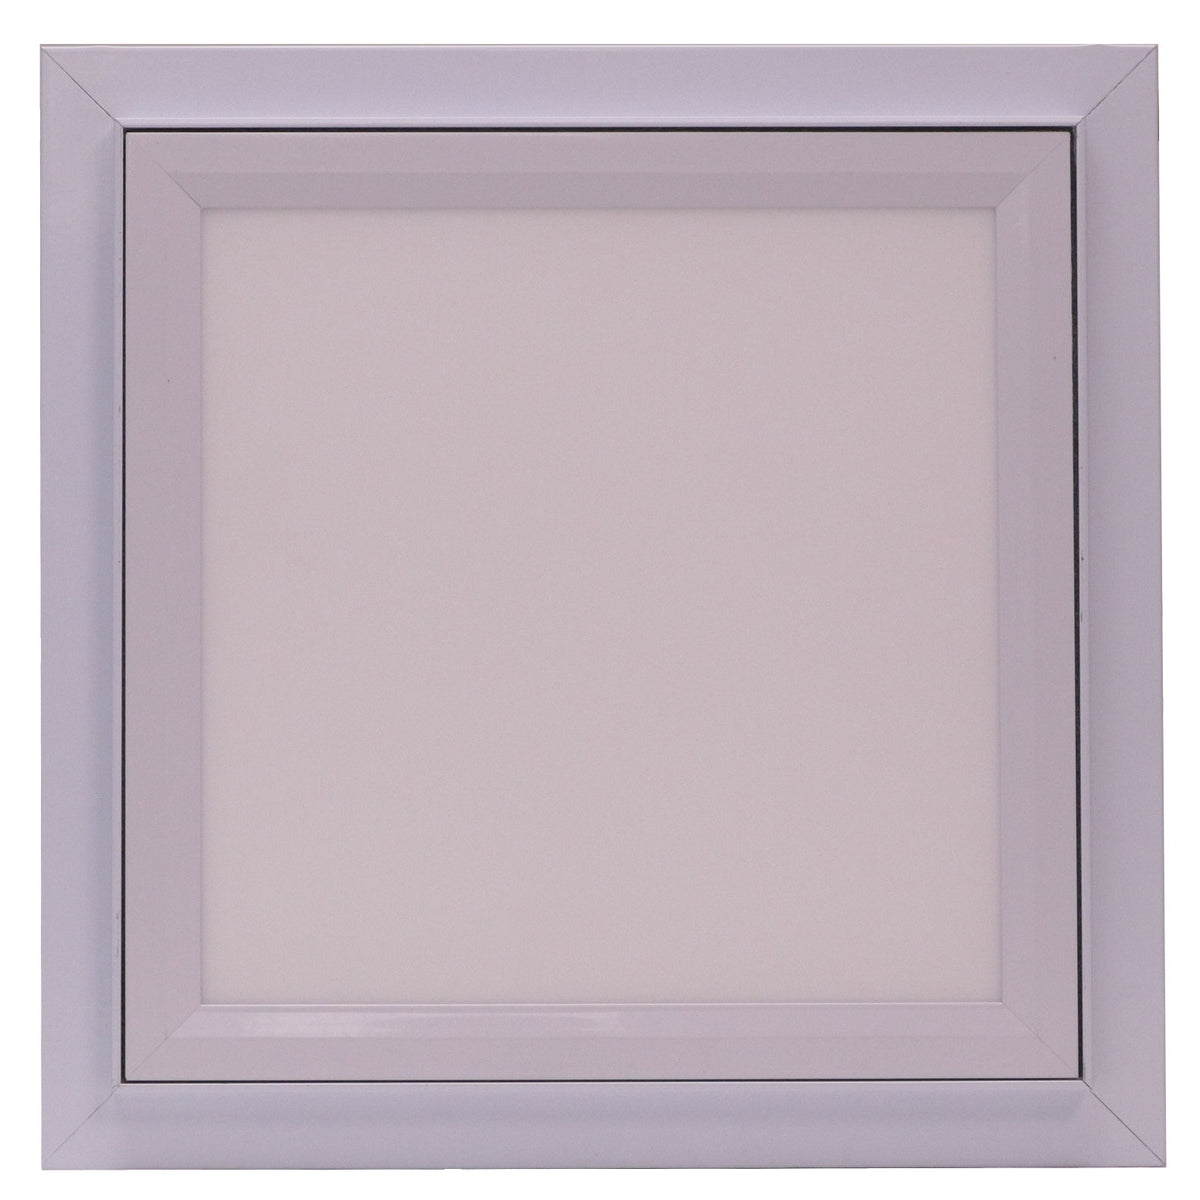 12&quot; X 12&quot; Aluminum LED Light Access Panel Door For Wall / Ceiling Application (Push-Lock) With Frame - [Outer Dimensions: 13&quot; Width X 13&quot; Height]